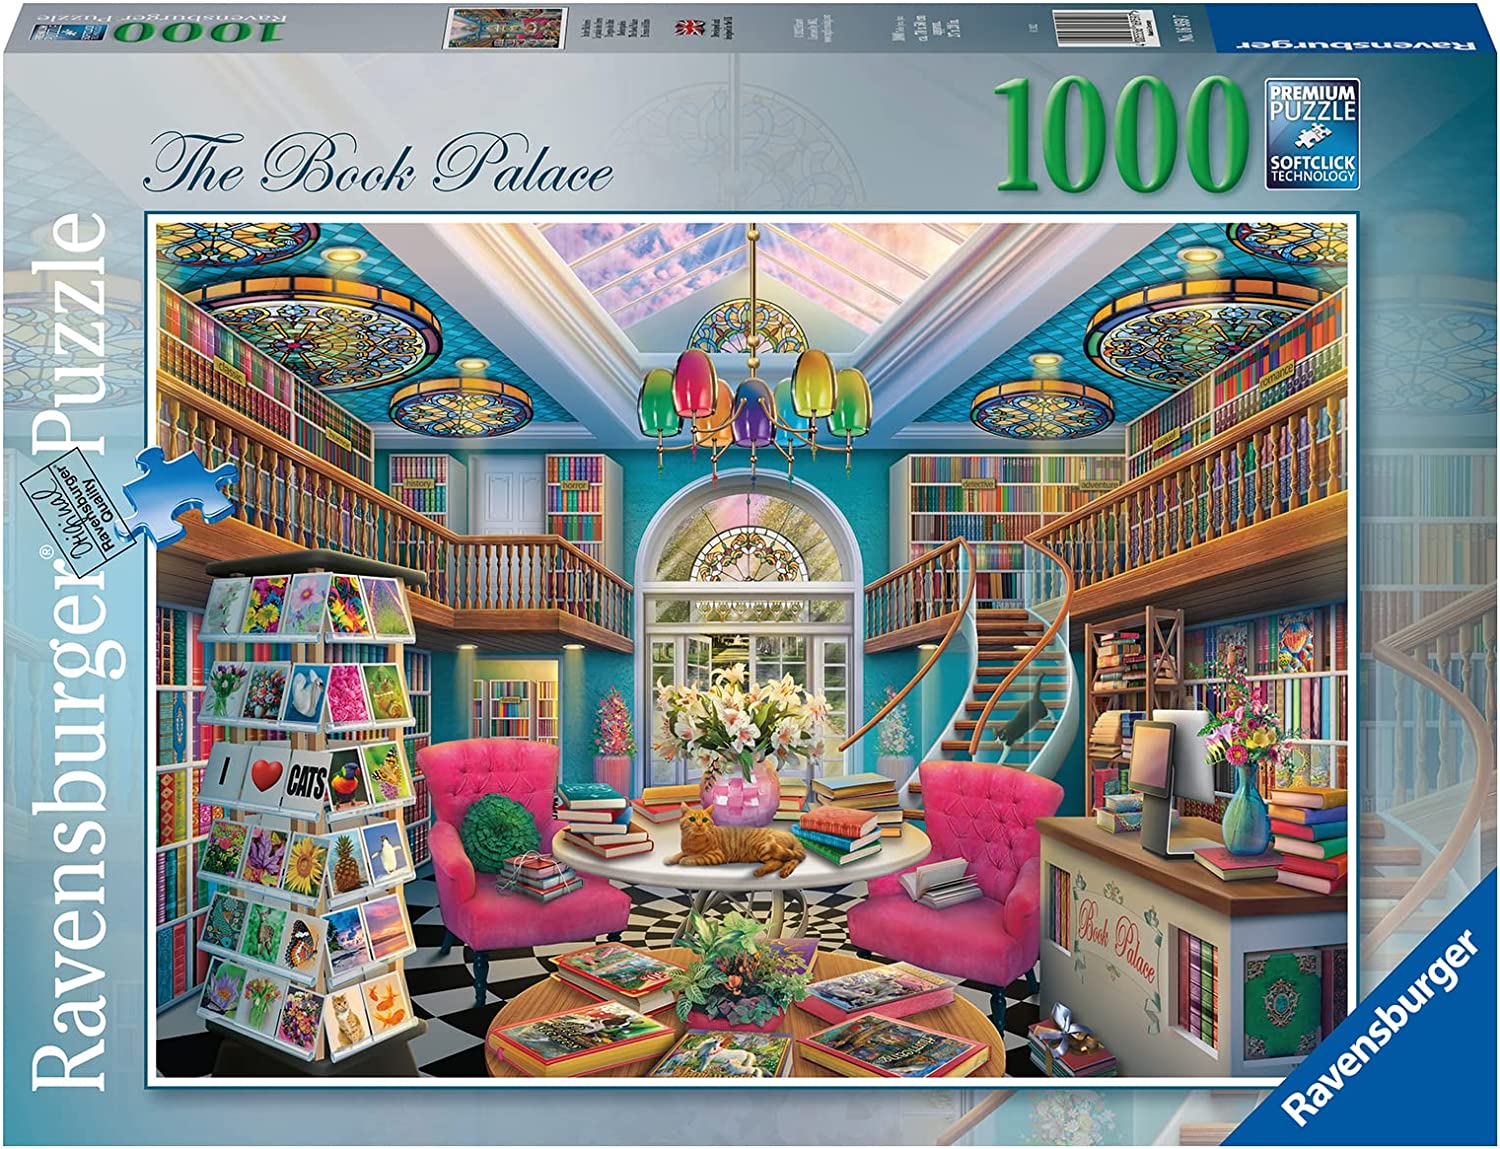 The Book Palace 1000 Piece Jigsaw Puzzle for Adults - 16959 Every Piece is Unique, Softclick Technology Means Pieces Fit Together Perfectly